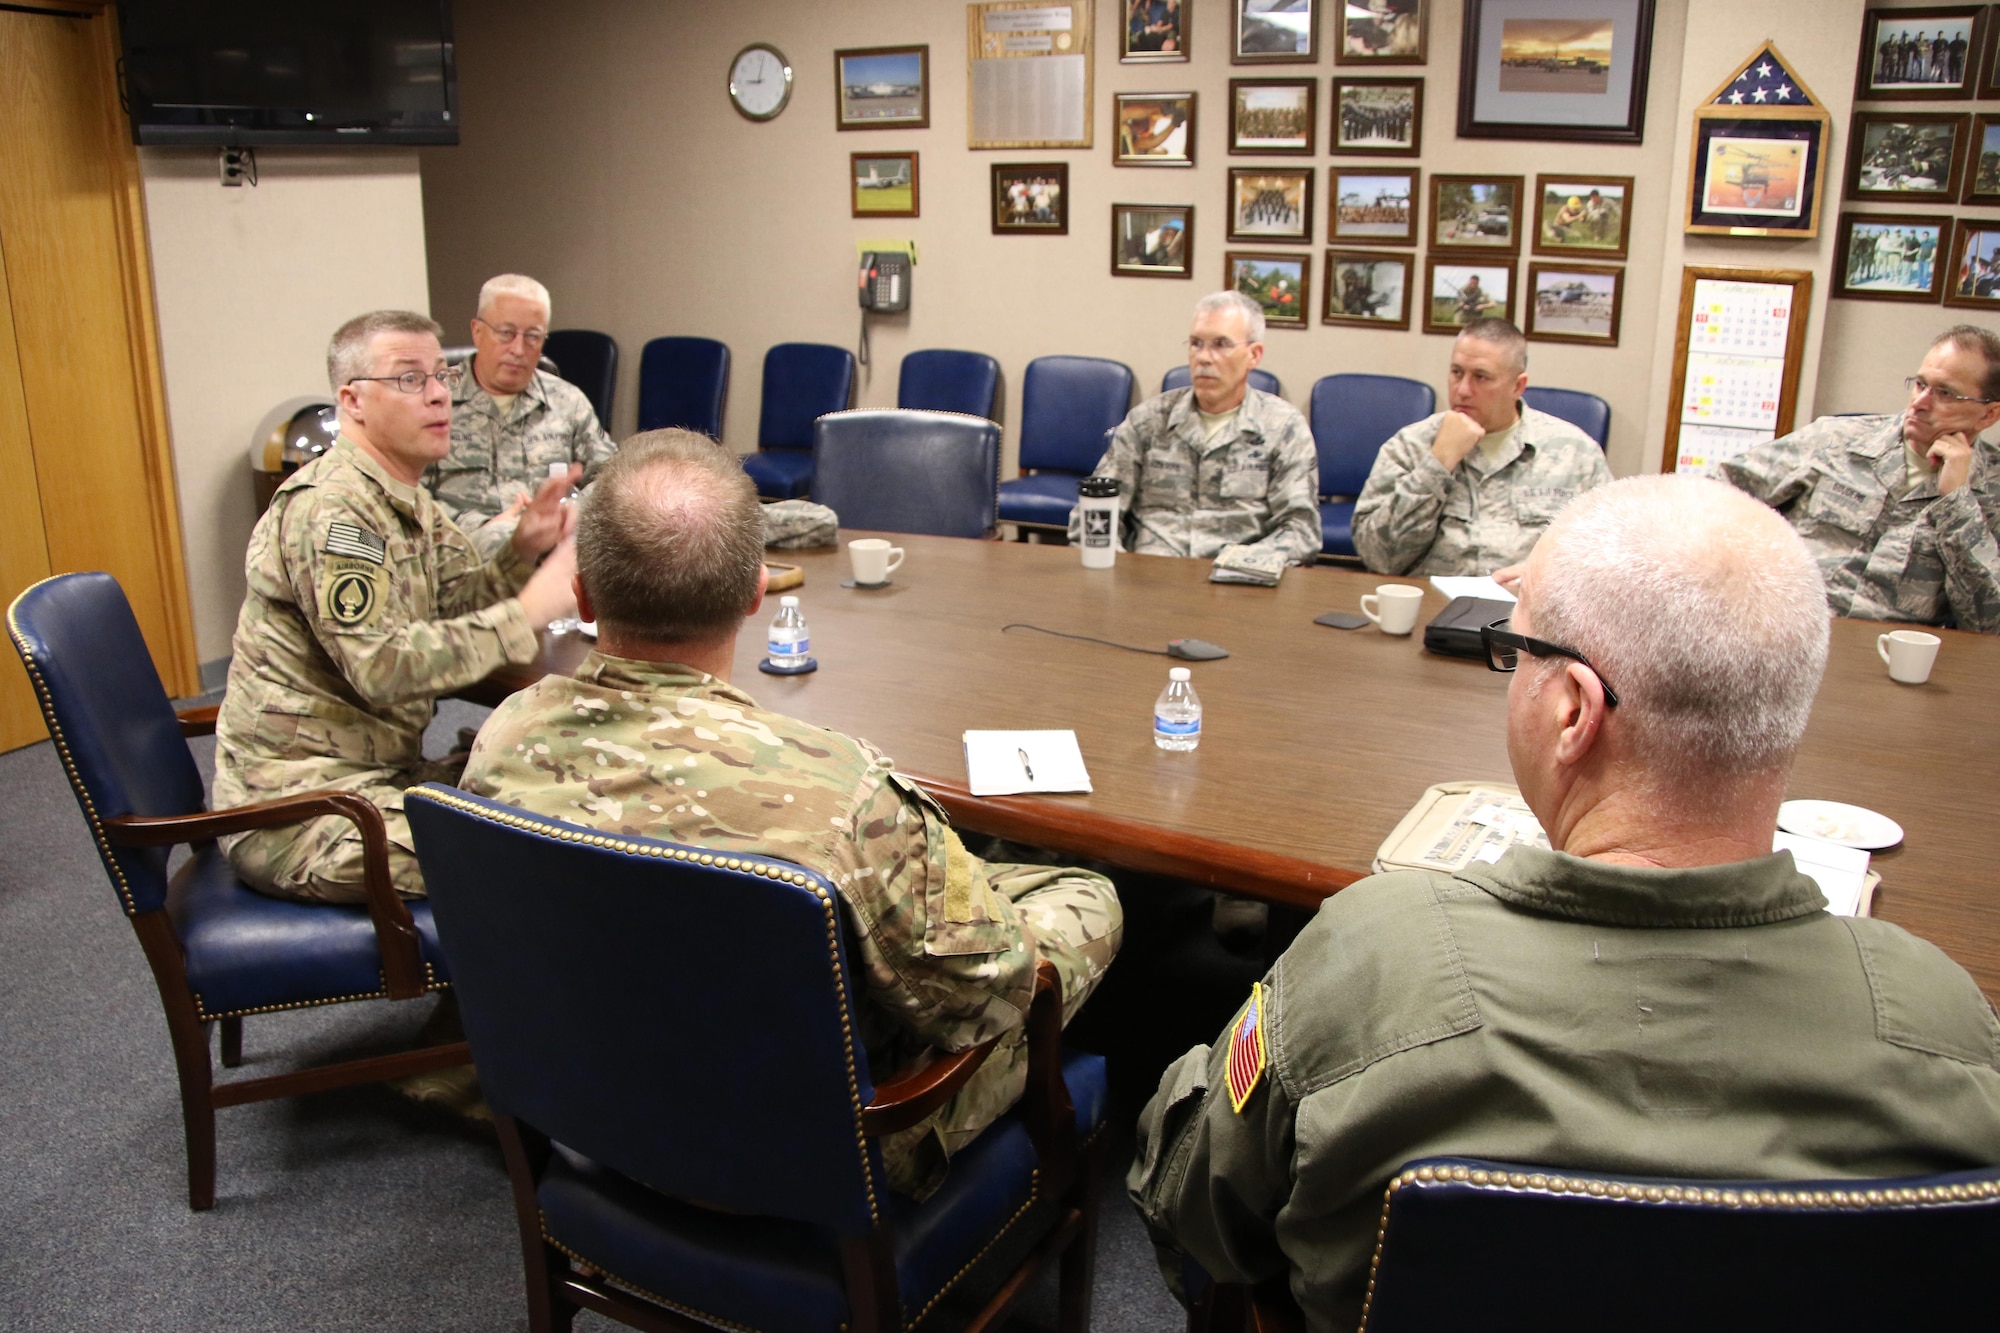 Chief Master Sgt. Gregory Smith (left), command chief master sergeant of Air Force Special Operations Command, meets with 193rd Special Operations Wing chief master sergeants at Middletown, Pennsylvania, June 10, 2017. Smith visited the 193rd SOW with U.S. Air Force Lt. Gen. Brad Webb, commander of Air Force Special Operations Command. (U.S. Air National Guard photo by Master Sgt. Culeen Shaffer/Released)